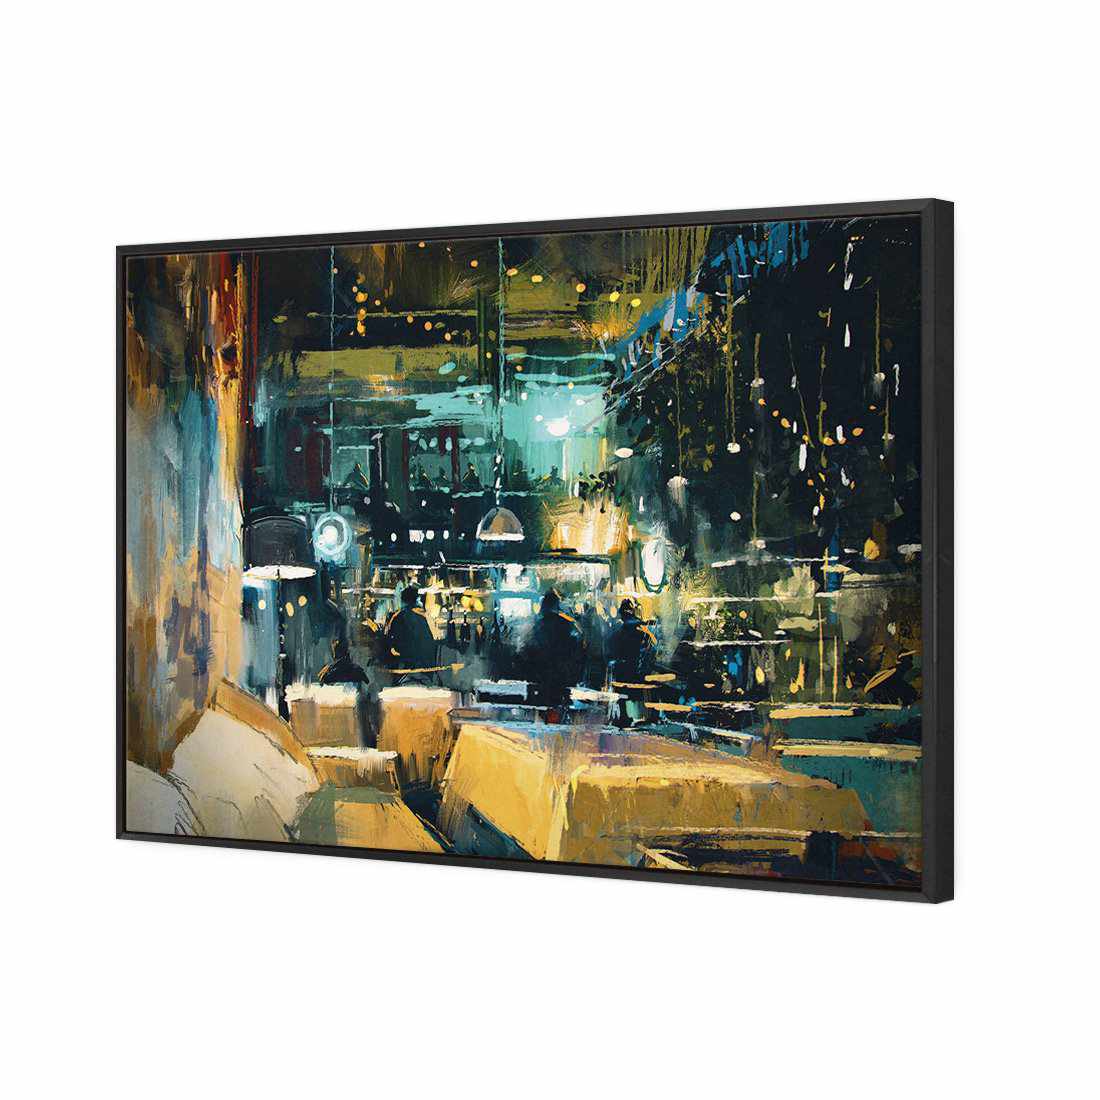 The Grand on Friday Canvas Art-Canvas-Wall Art Designs-45x30cm-Canvas - Black Frame-Wall Art Designs